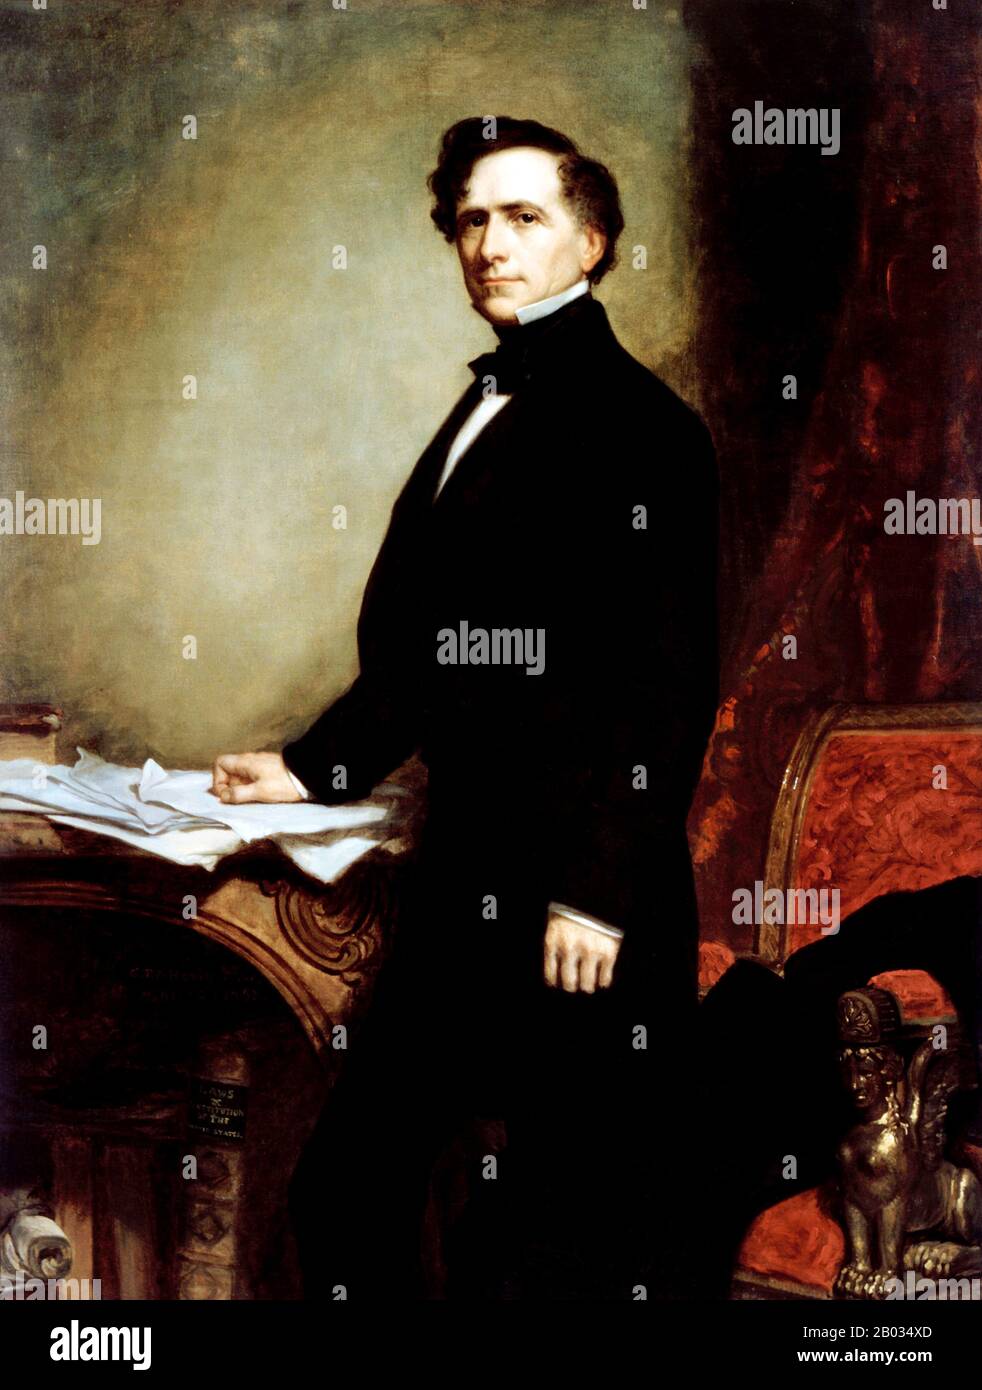 Franklin Pierce (November 23, 1804 – October 8, 1869) was the 14th President of the United States (1853–57). Pierce was a northern Democrat who saw the abolitionist movement as a fundamental threat to the unity of the nation.  His polarizing actions in championing and signing the Kansas–Nebraska Act and enforcing the Fugitive Slave Act failed to stem intersectional conflict, setting the stage for Southern secession. Stock Photo